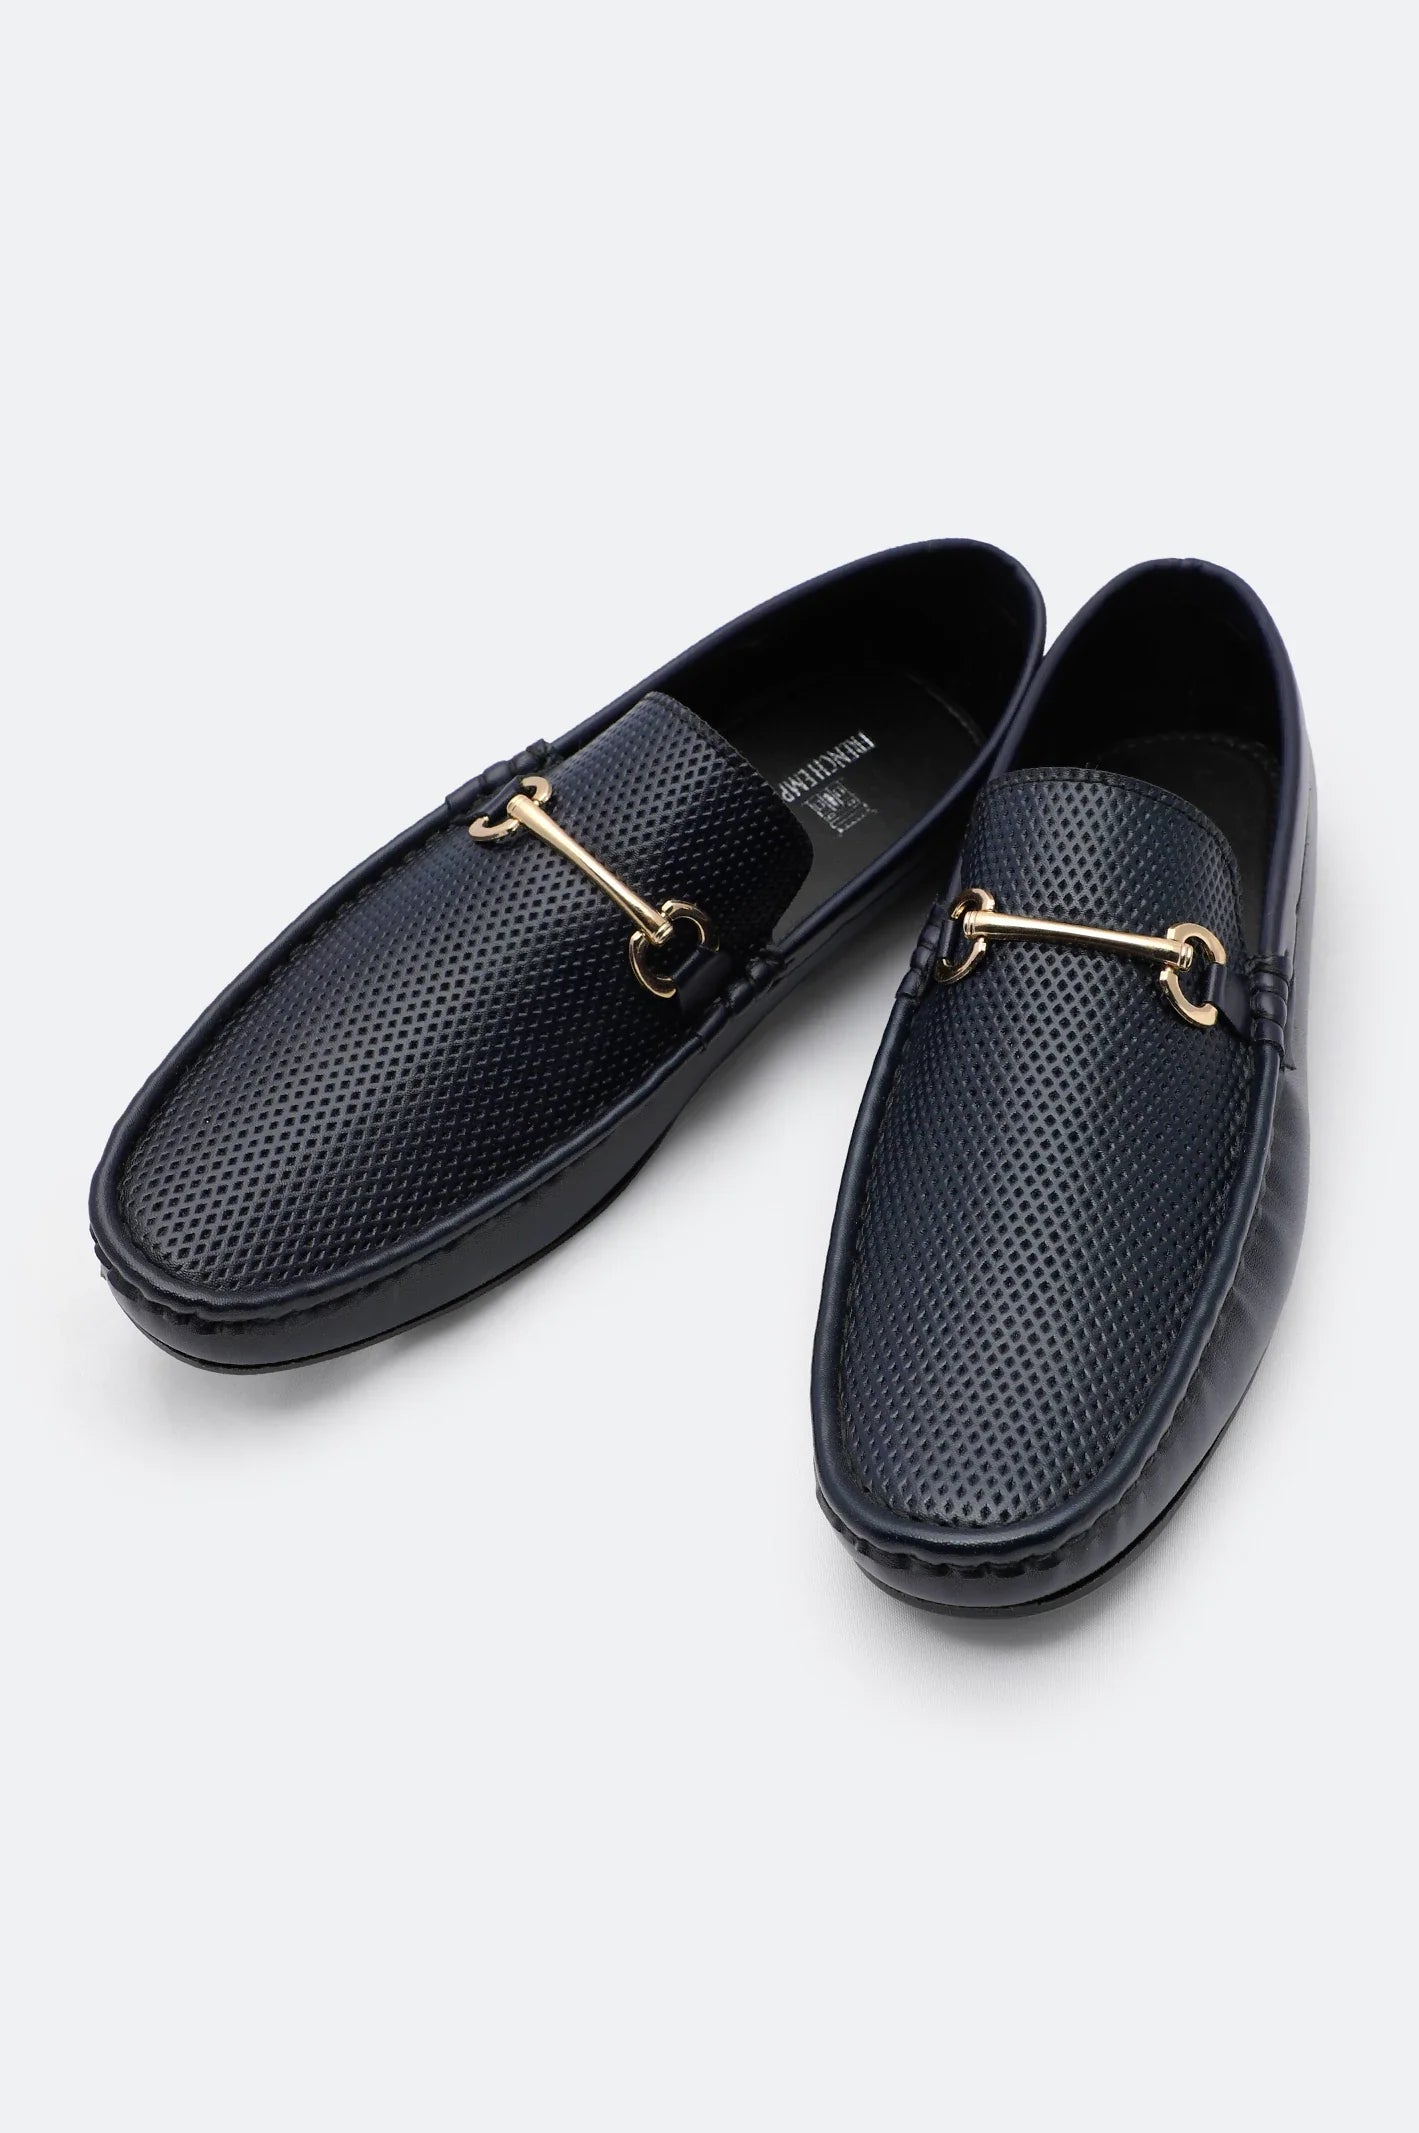 Navy Blue Casual Moccasins Shoes